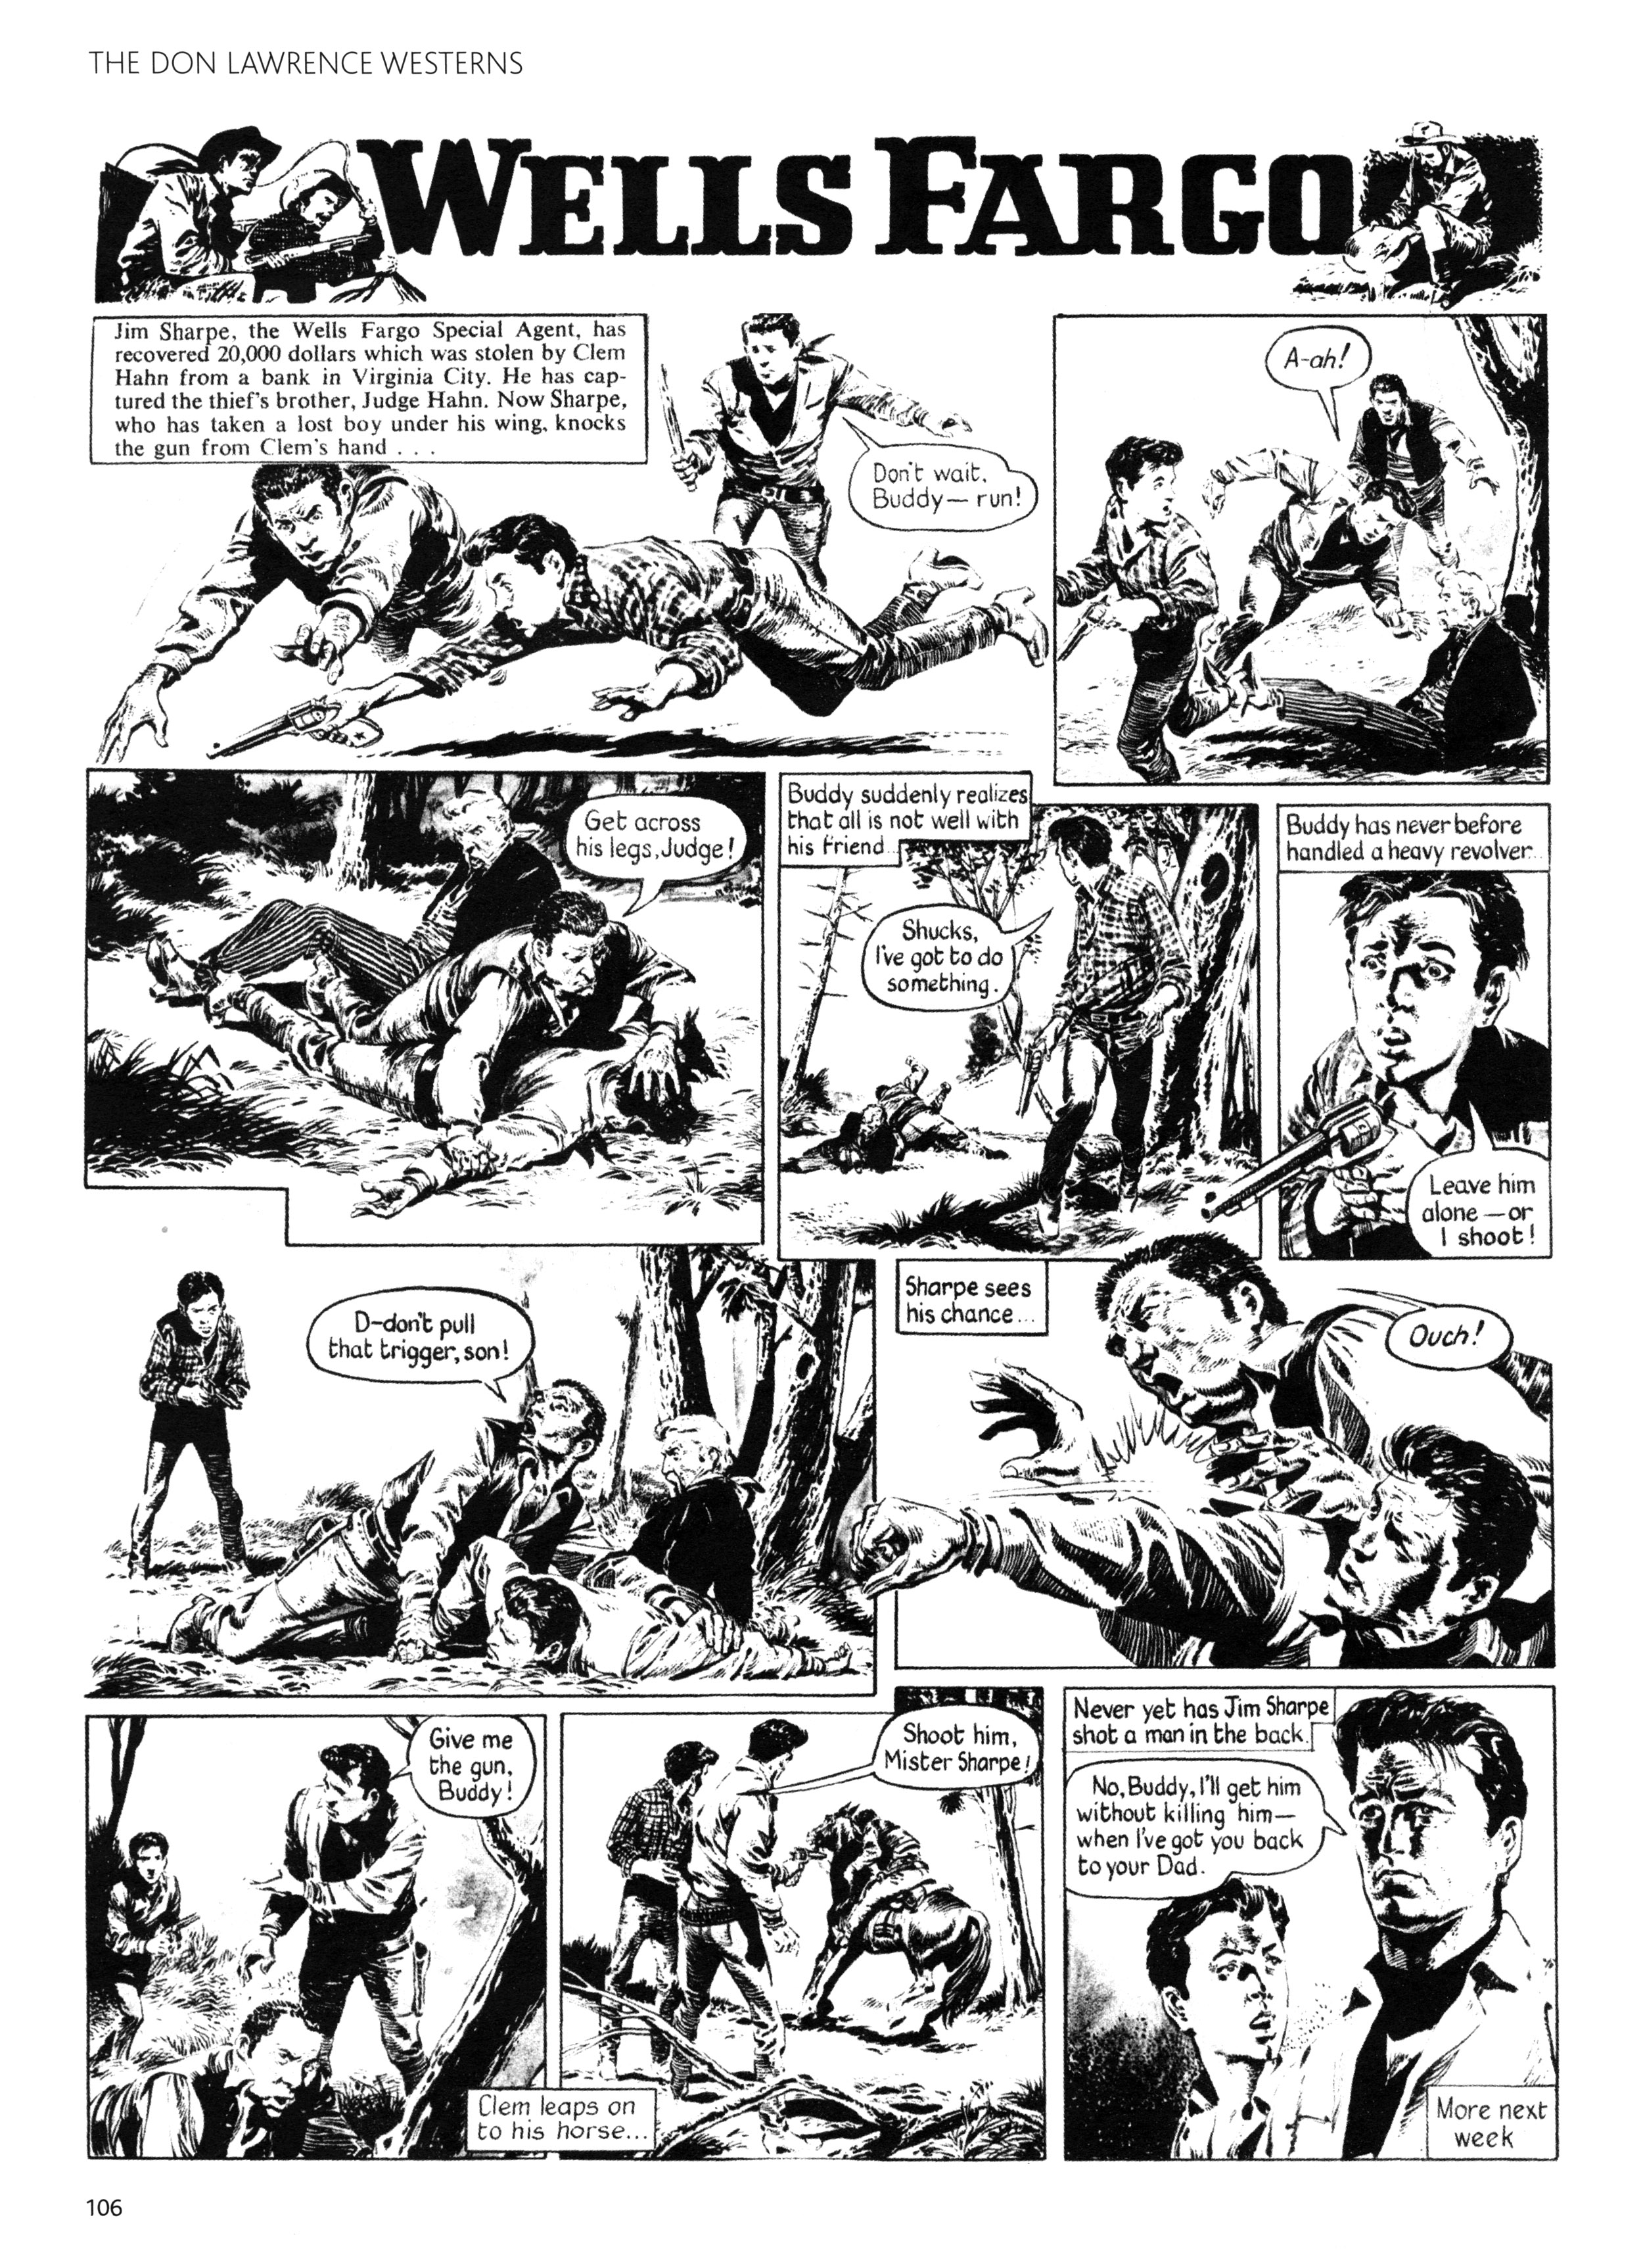 Read online Don Lawrence Westerns comic -  Issue # TPB (Part 2) - 7